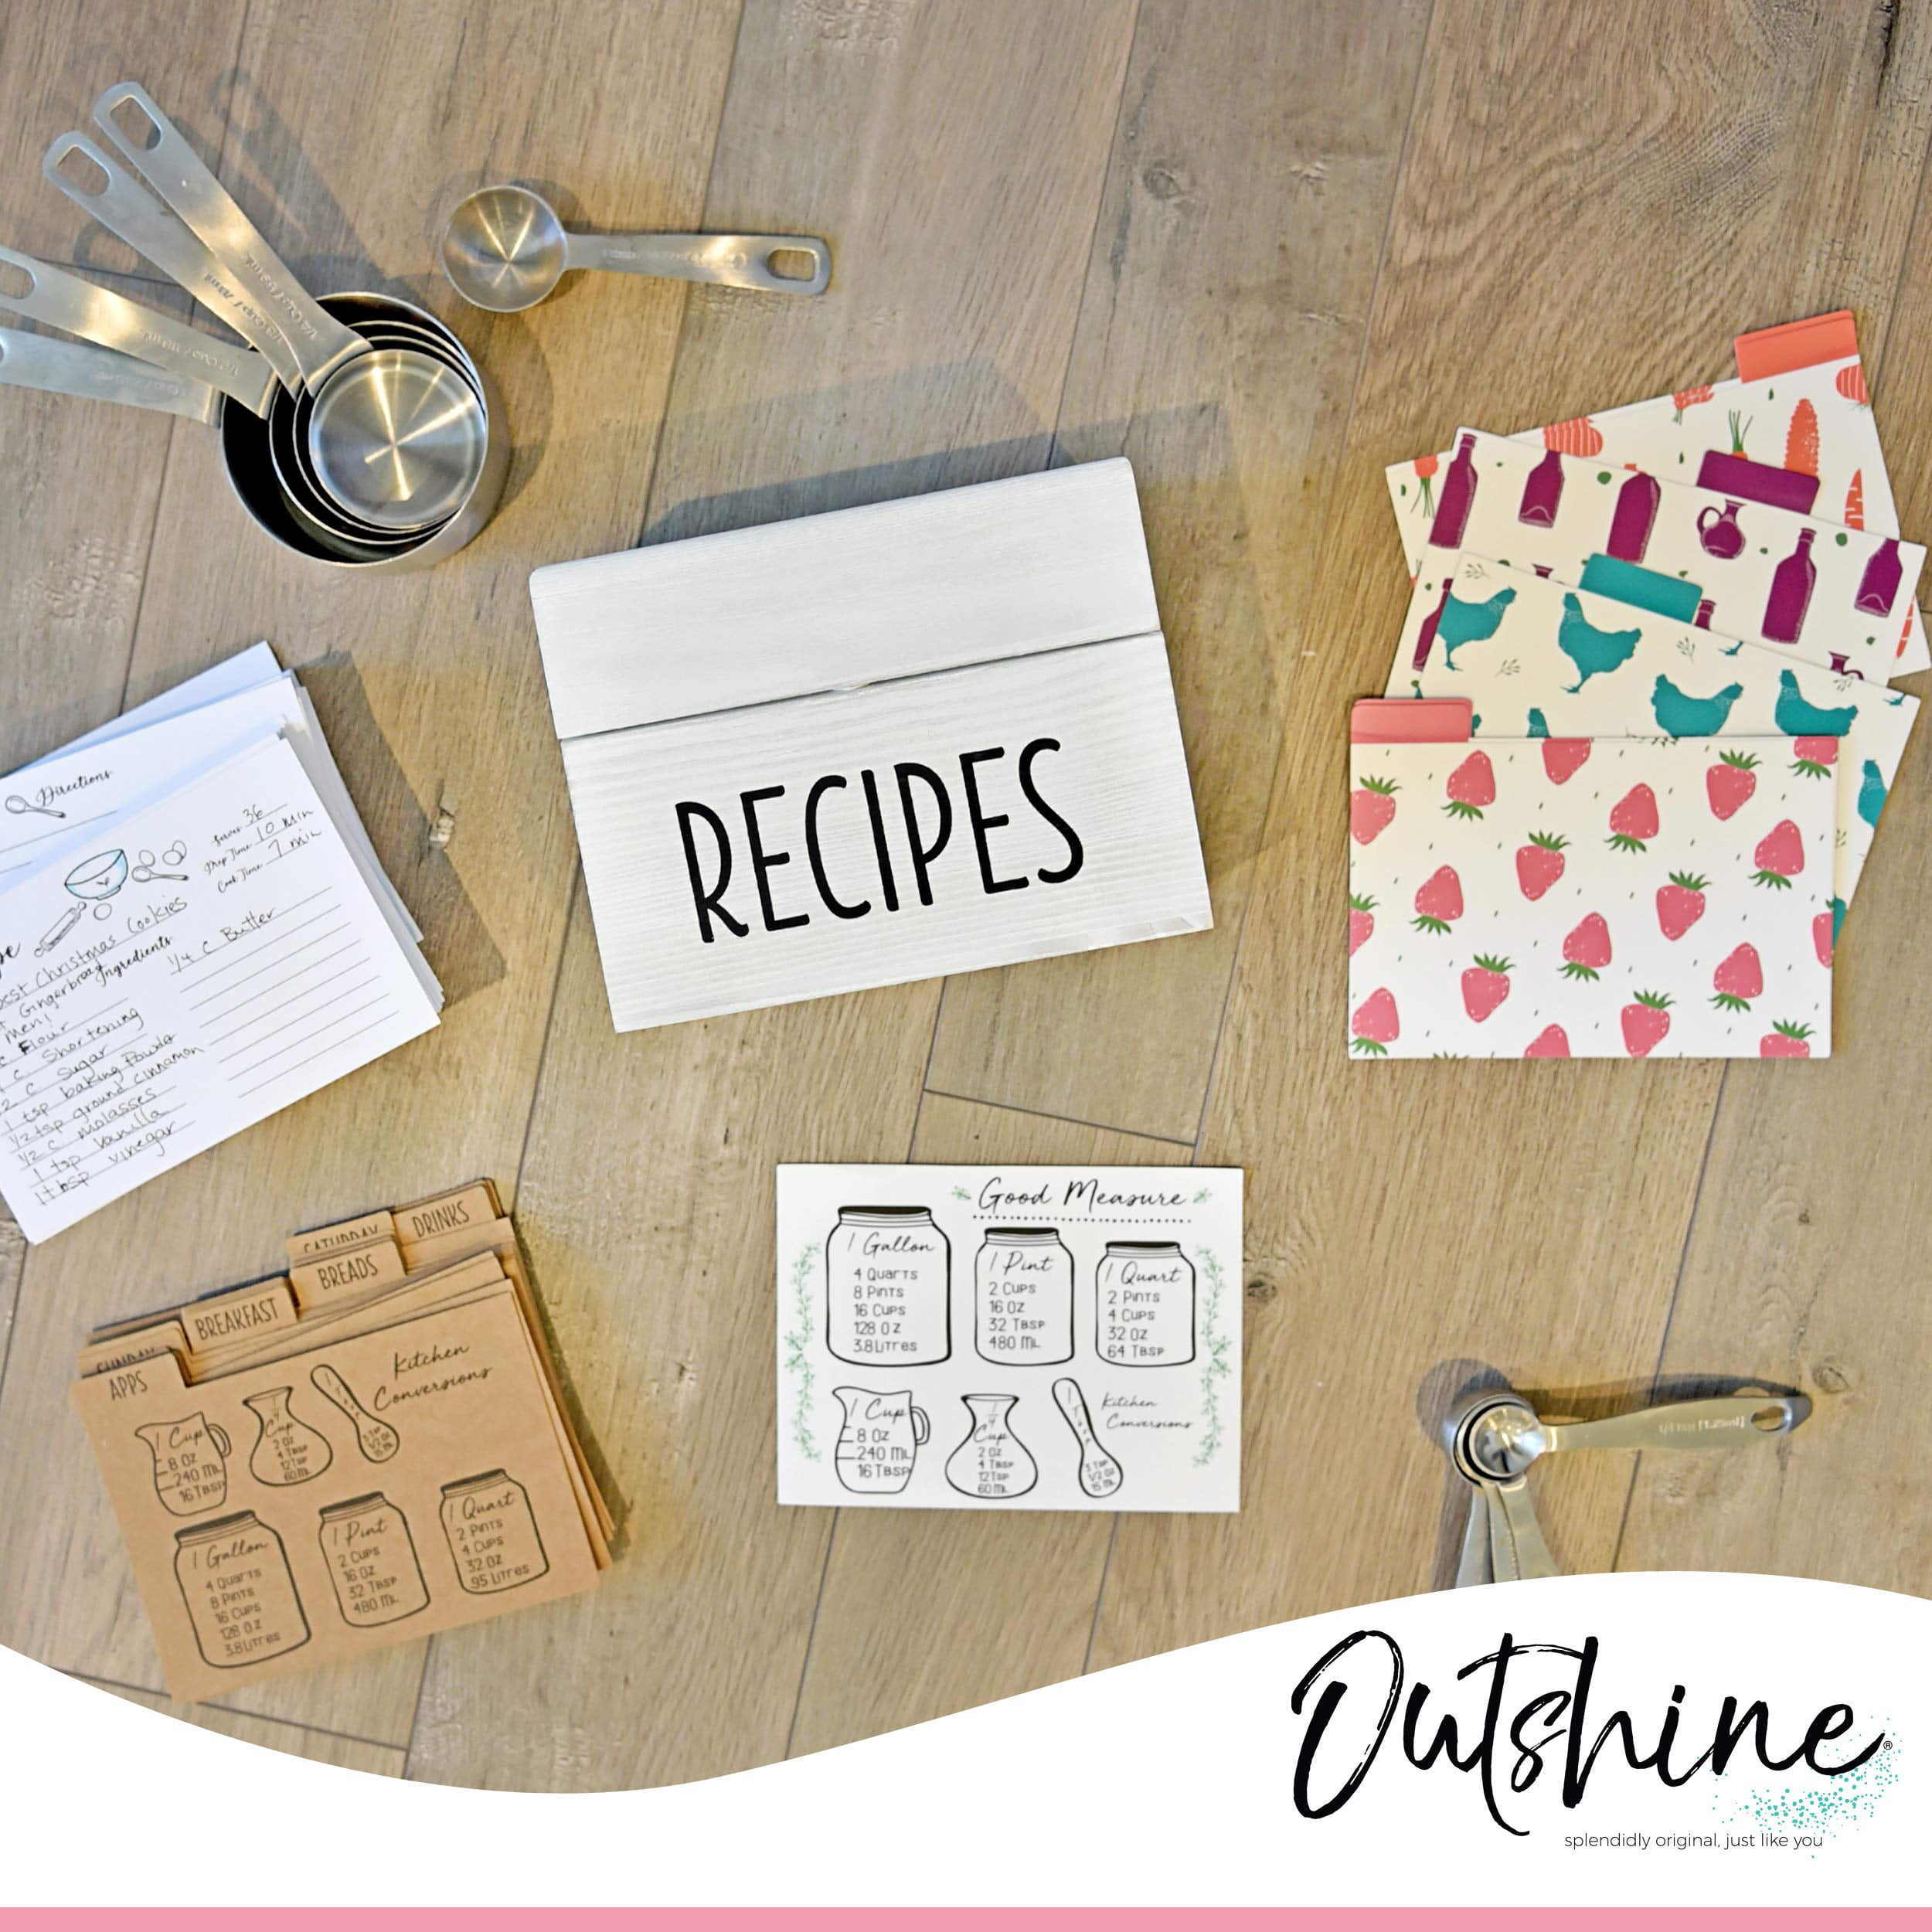 Outshine Premium White Recipe Card Dividers 4x6 with Tabs (Set of 24) | Recipe Box Dividers Made of Thick Cardstock | Includes 28 Adhesive Labels